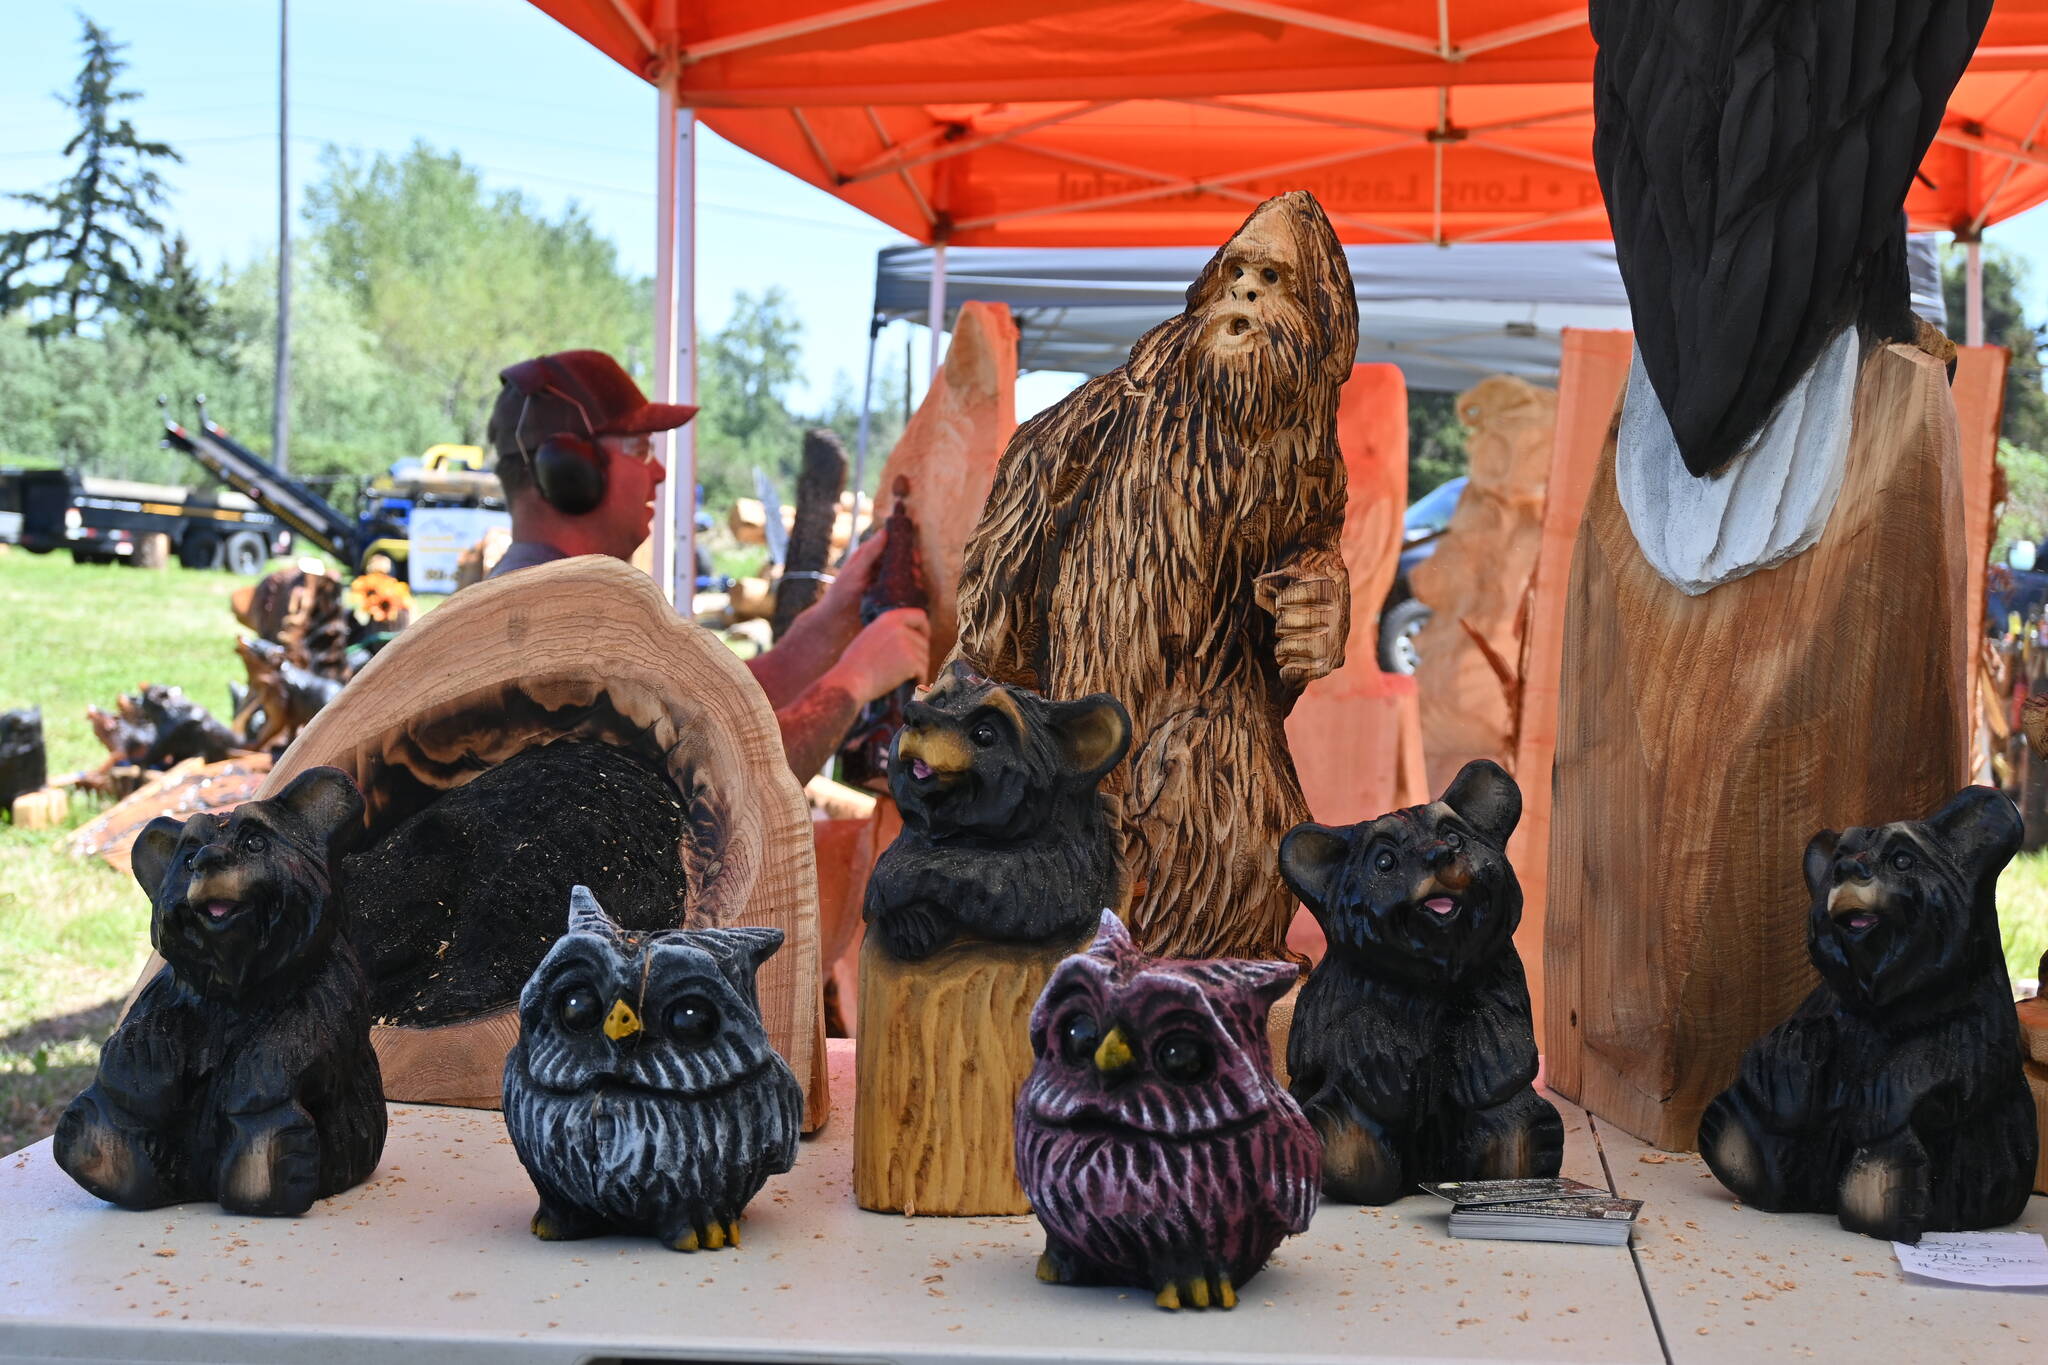 Sequim Gazette photo by Michael Dashiell / Some creations by Nick Bielby of Nicklby Wood Carving and Eric Berson of The Dreamer’s Woods, both of Port Angeles, are on display at their booth at the Sequim Irrigation Festival Logging Show on May 12.